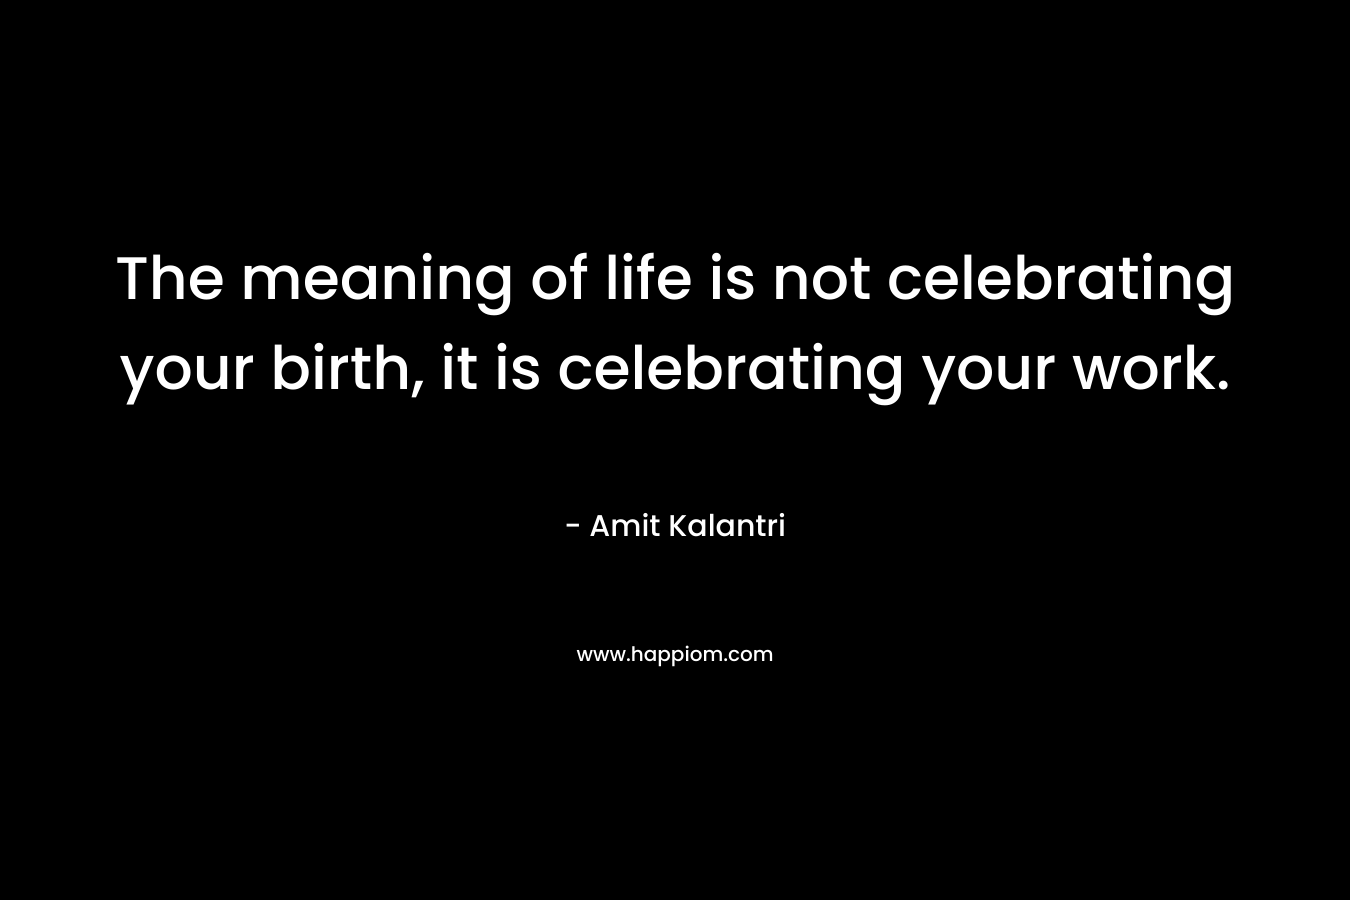 The meaning of life is not celebrating your birth, it is celebrating your work. – Amit Kalantri